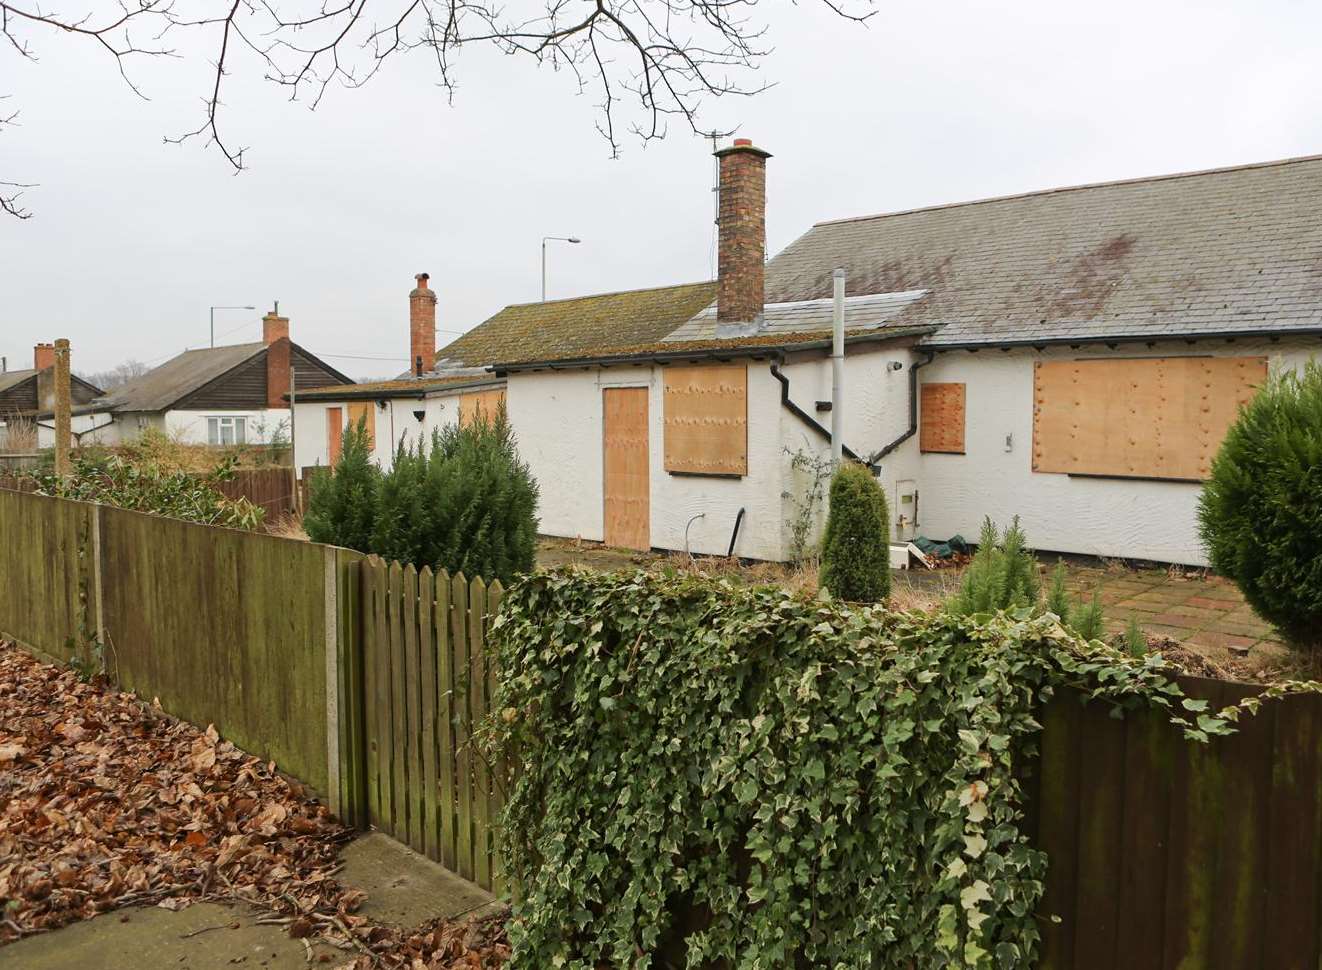 Permission has been granted to demolish bungalows in Hermitage Lane.